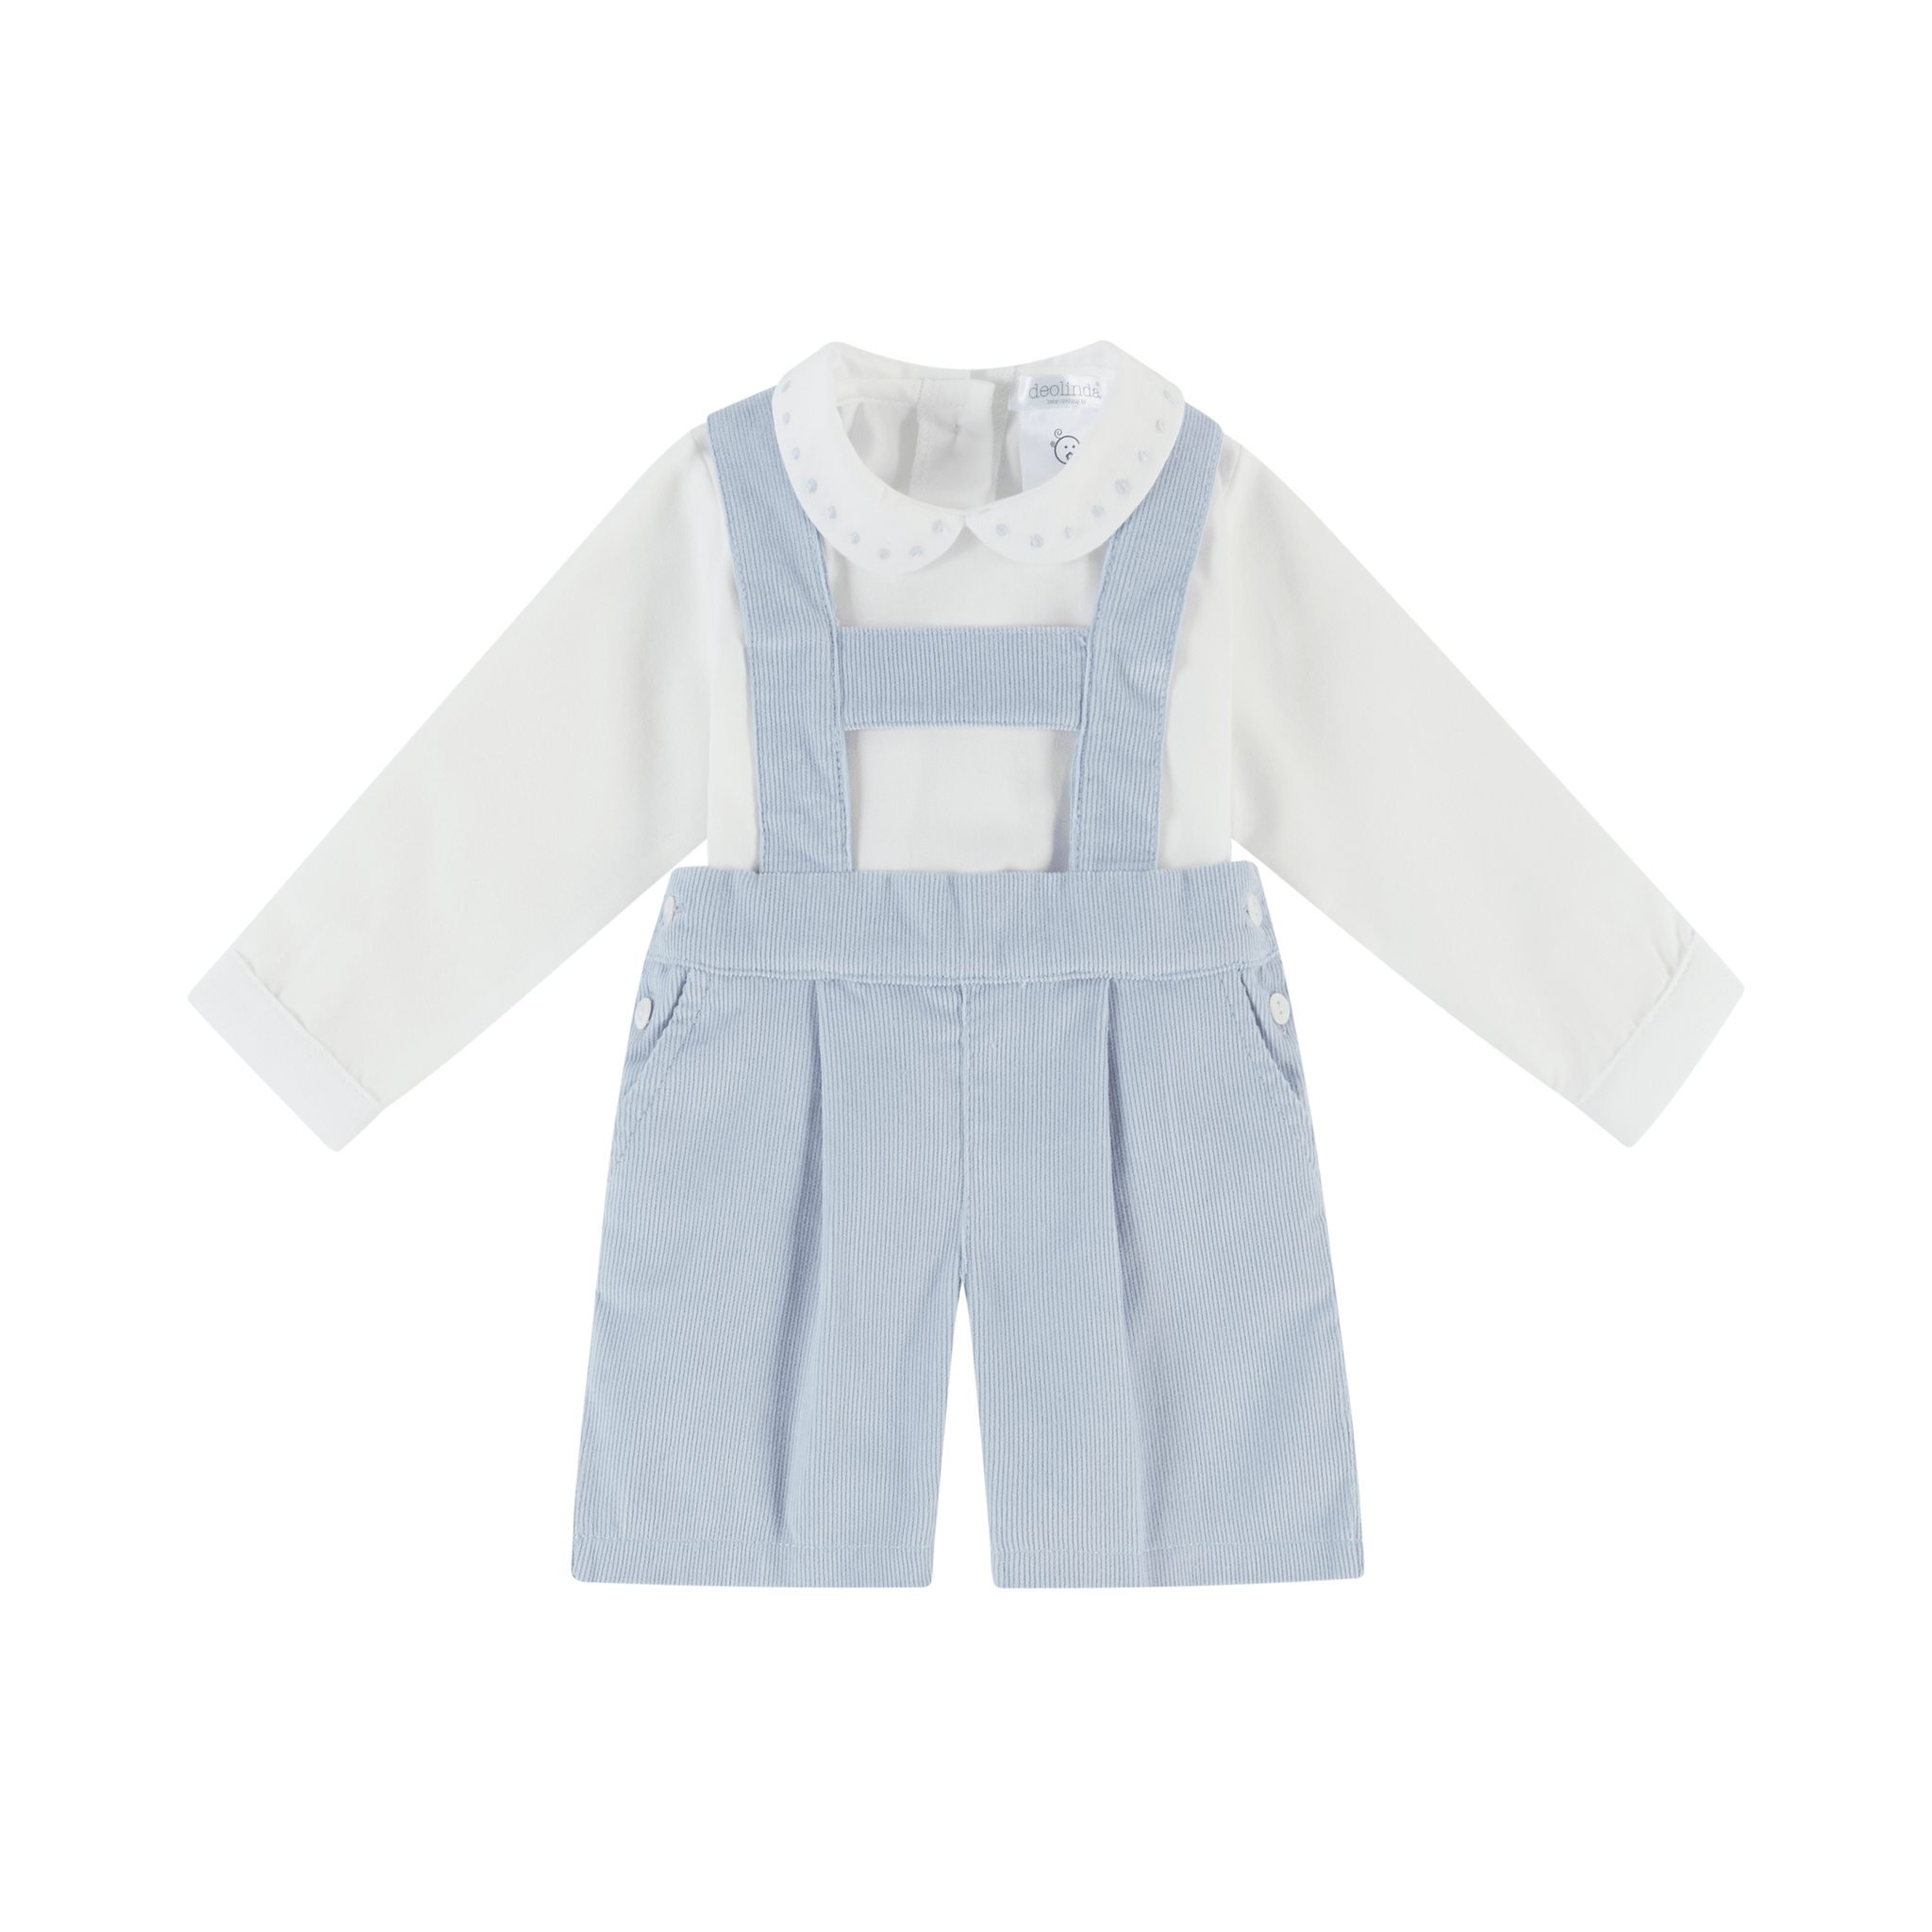 Deolinda Tops & Shorts 3m Deolinda Baby Girls Dusty Blue James Strappy Shorts + Top